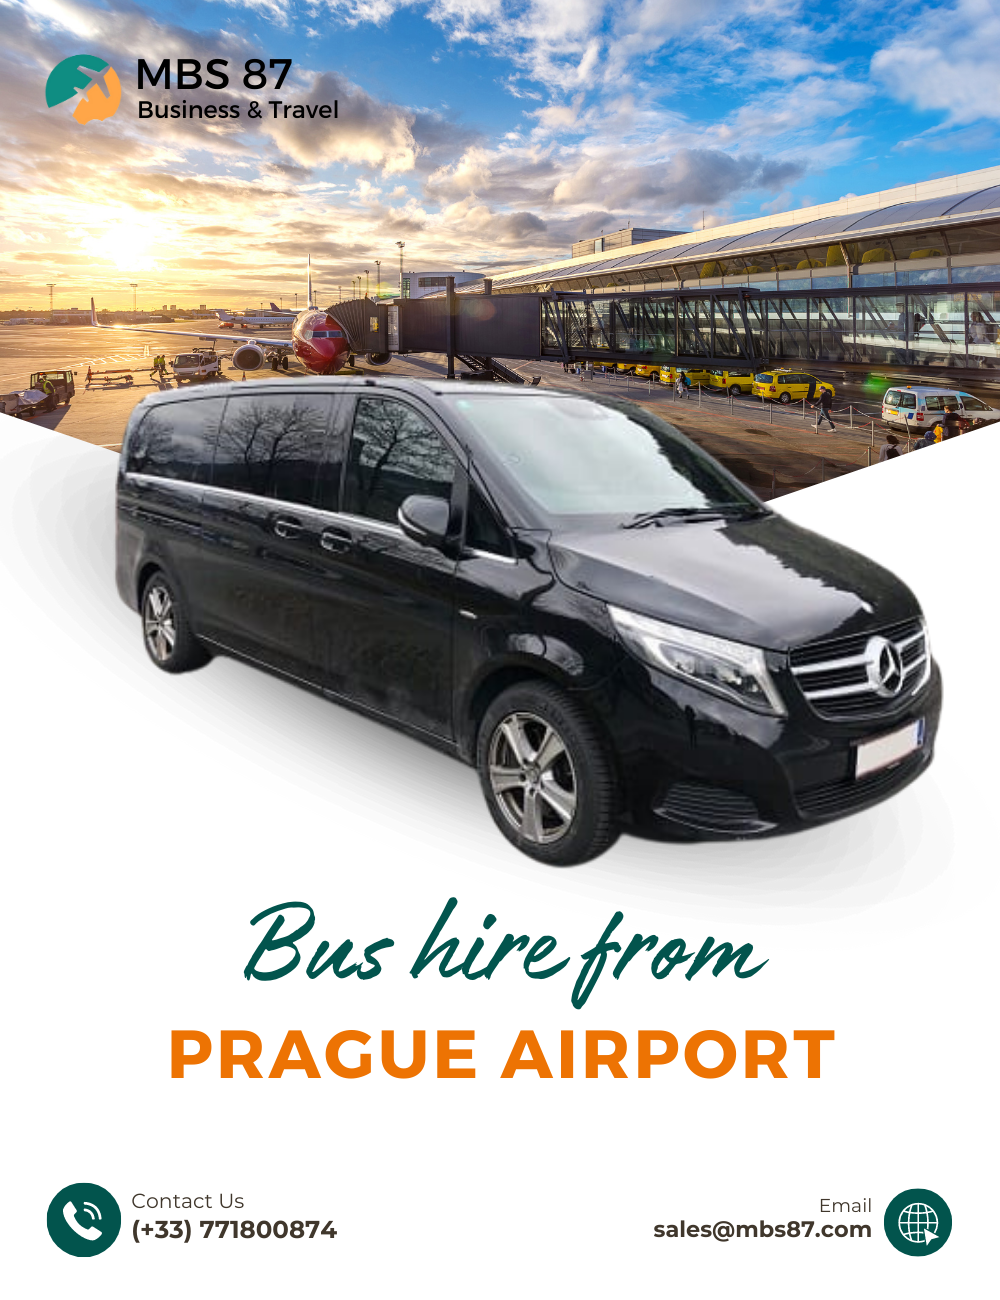 How to Have a Stress-Free Arrival with MBS87 Store's Airport Transfer Service in Prague